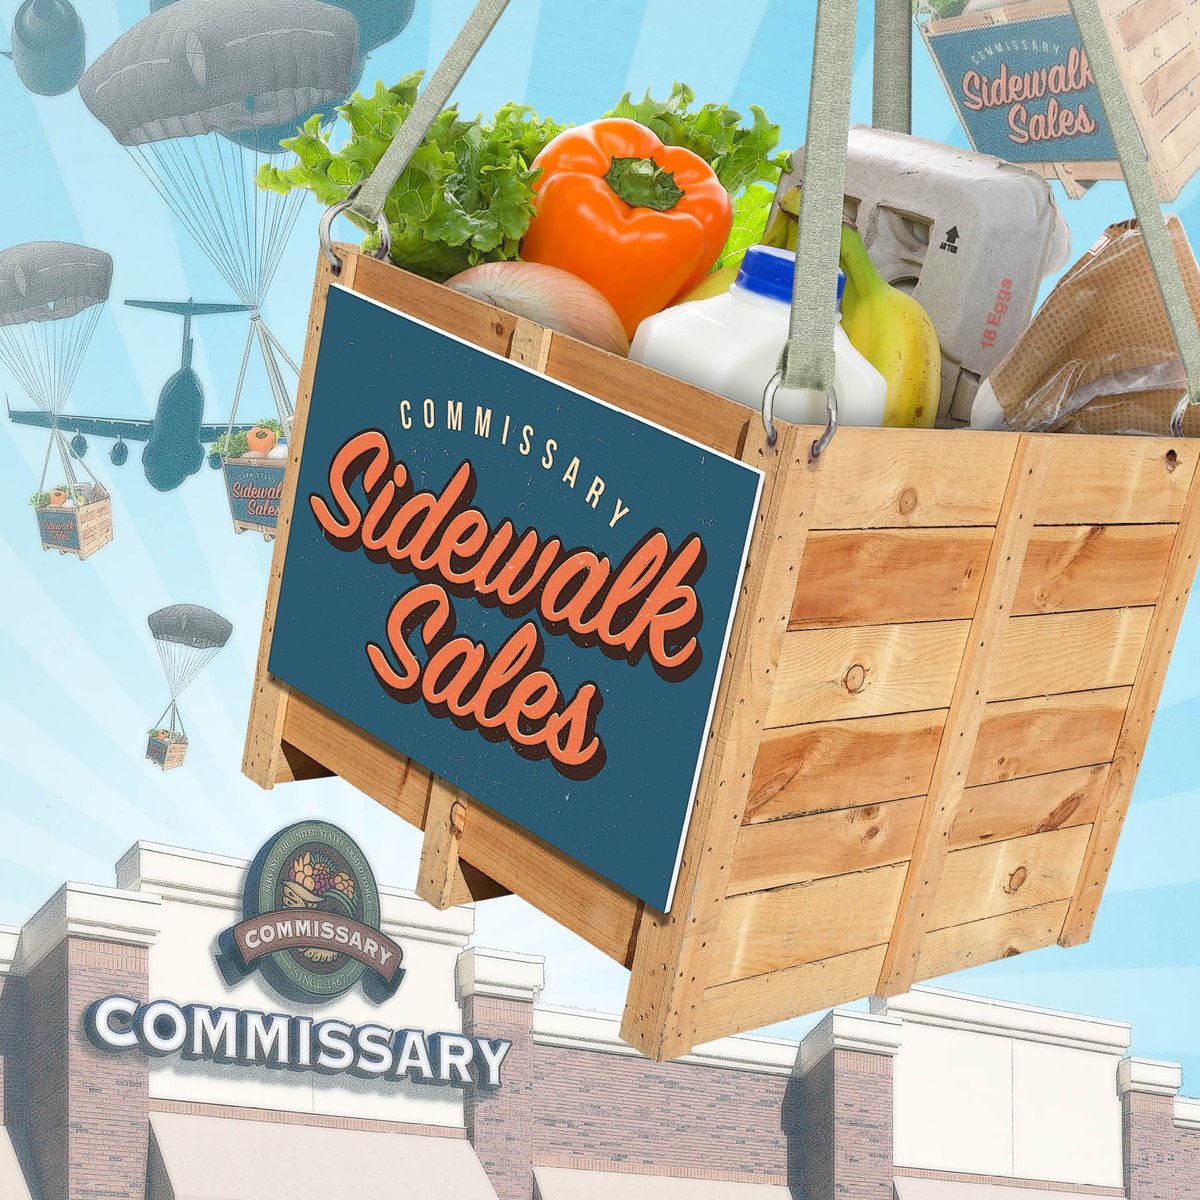 Commissary patrons stateside can stock up on their favorite items at significant savings during the Defense Commissary Agency’s Sidewalk Sales event throughout the month of May. Find your dates at: corp.commissaries.com/rewards-and-sa… #commissarysavings #sidewalksale